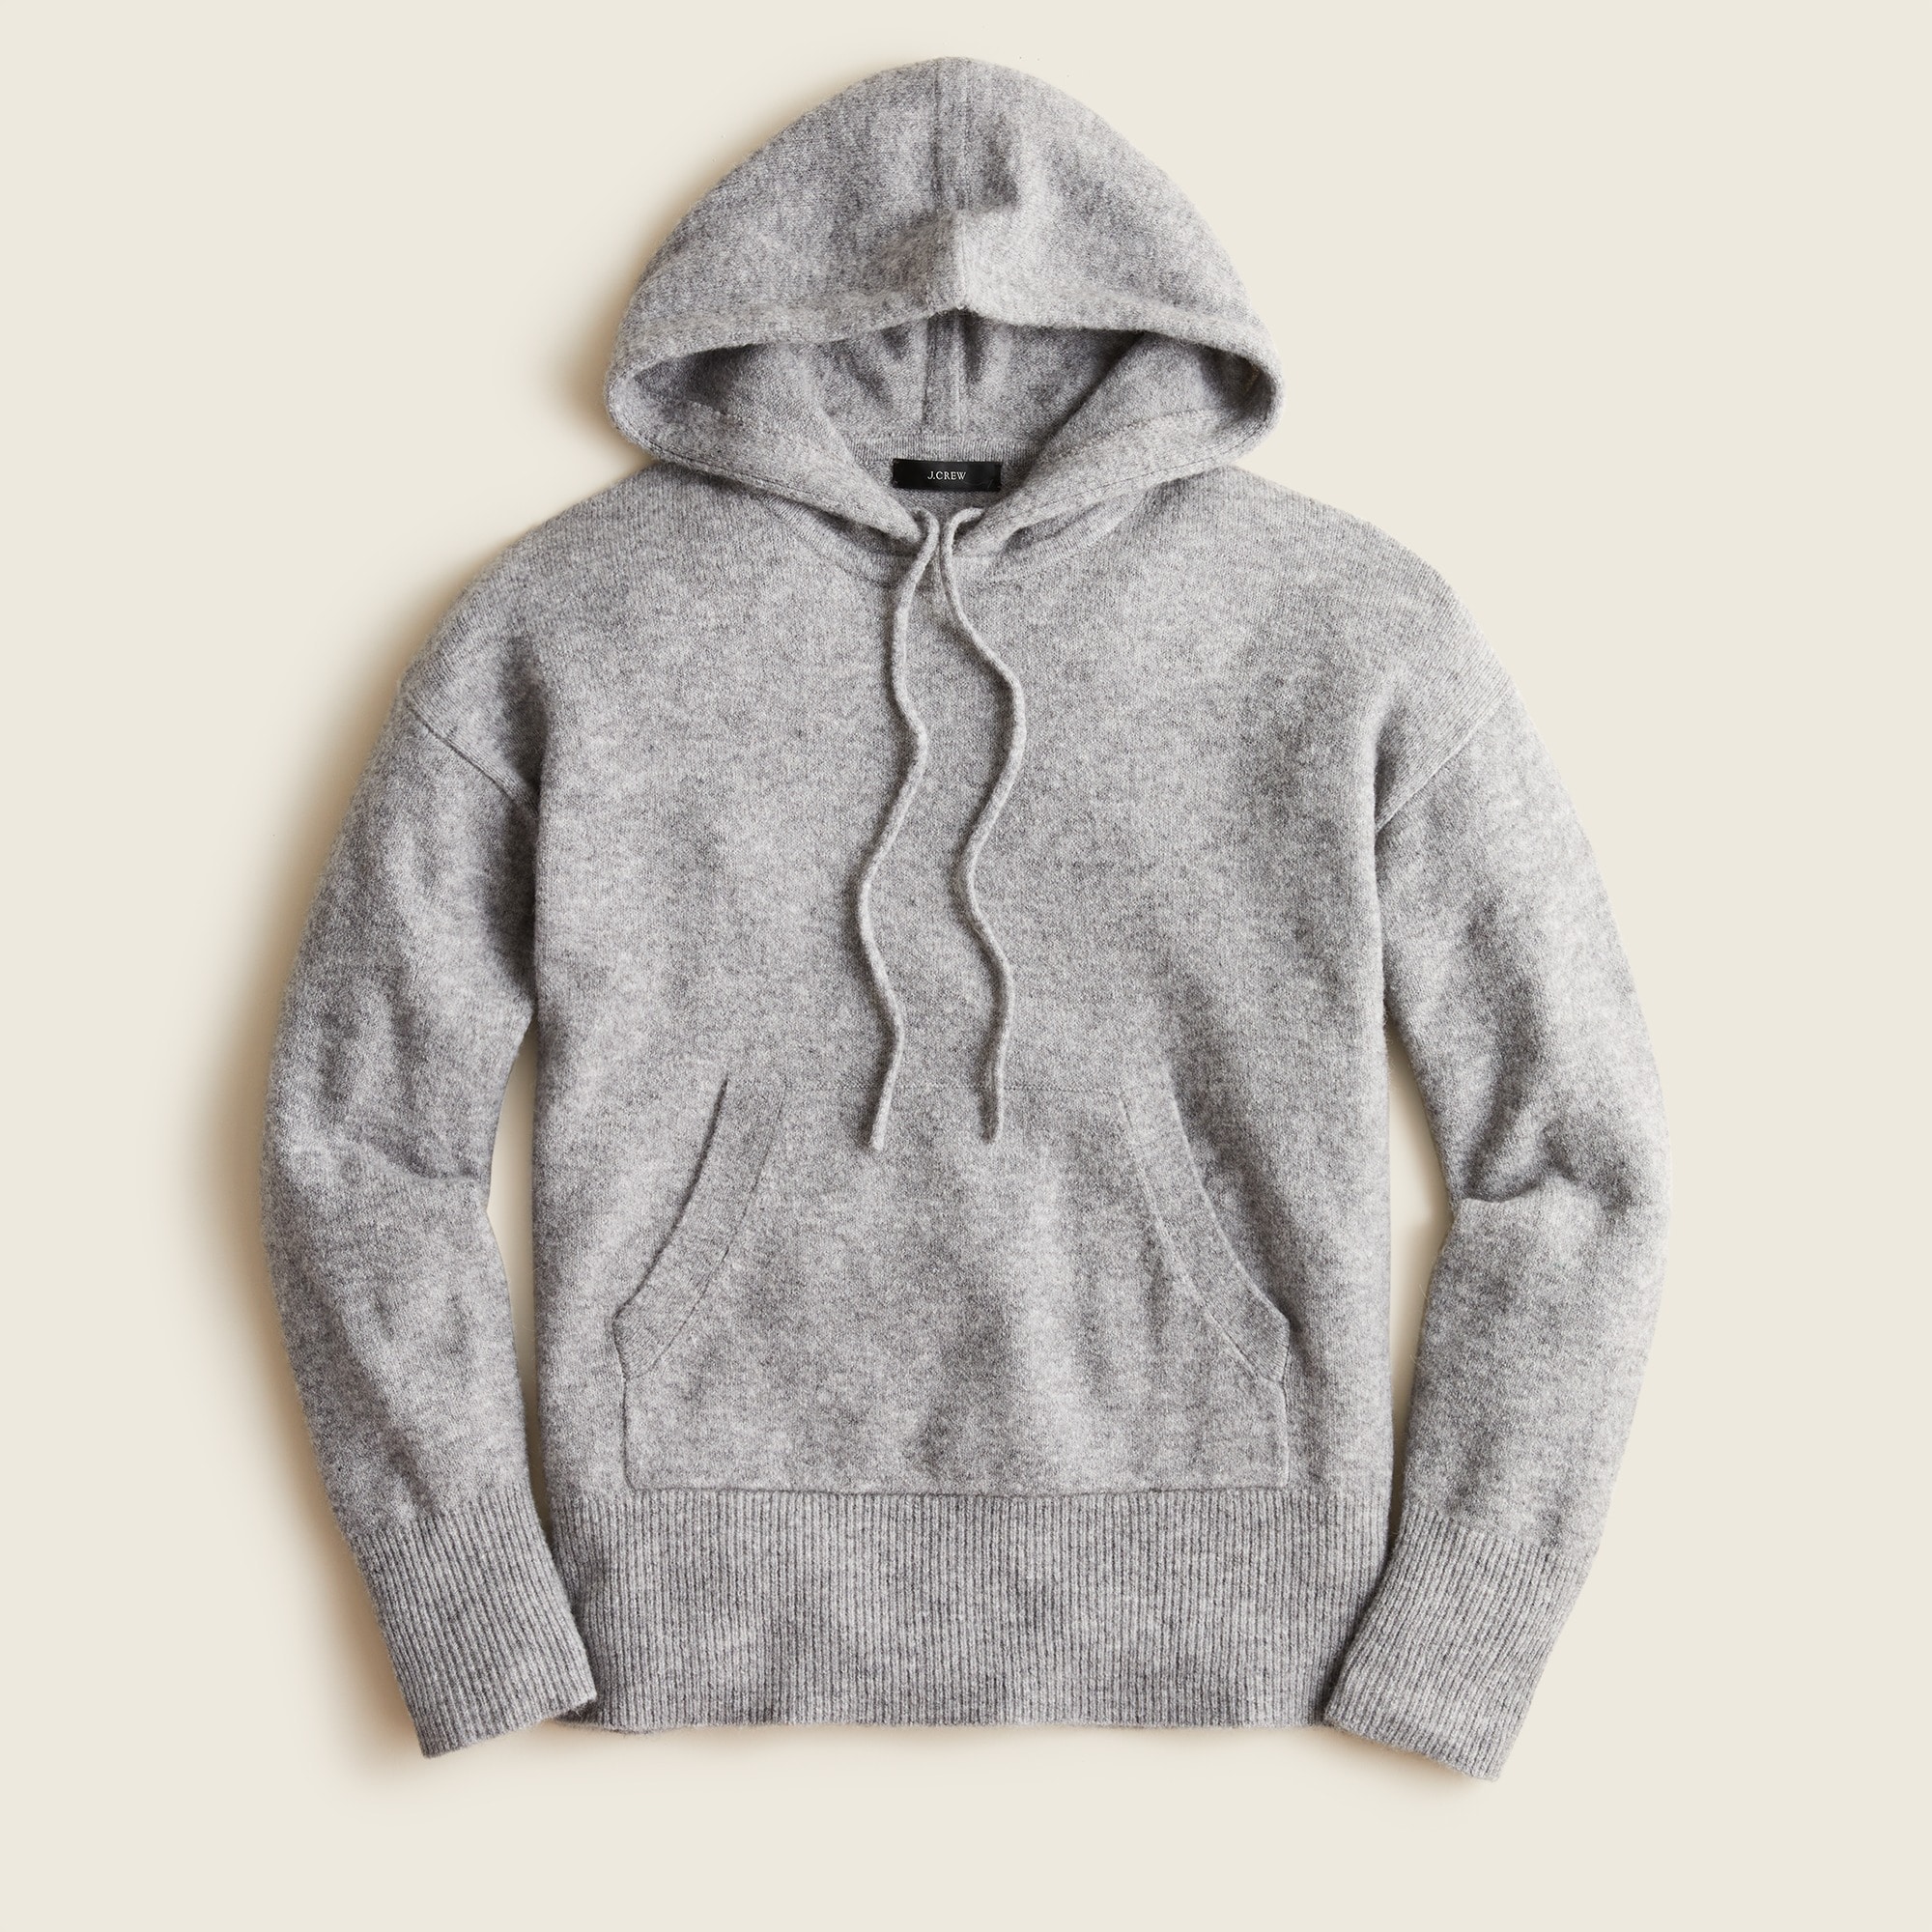 J.Crew: Hoodie-sweater In Supersoft Yarn For Women